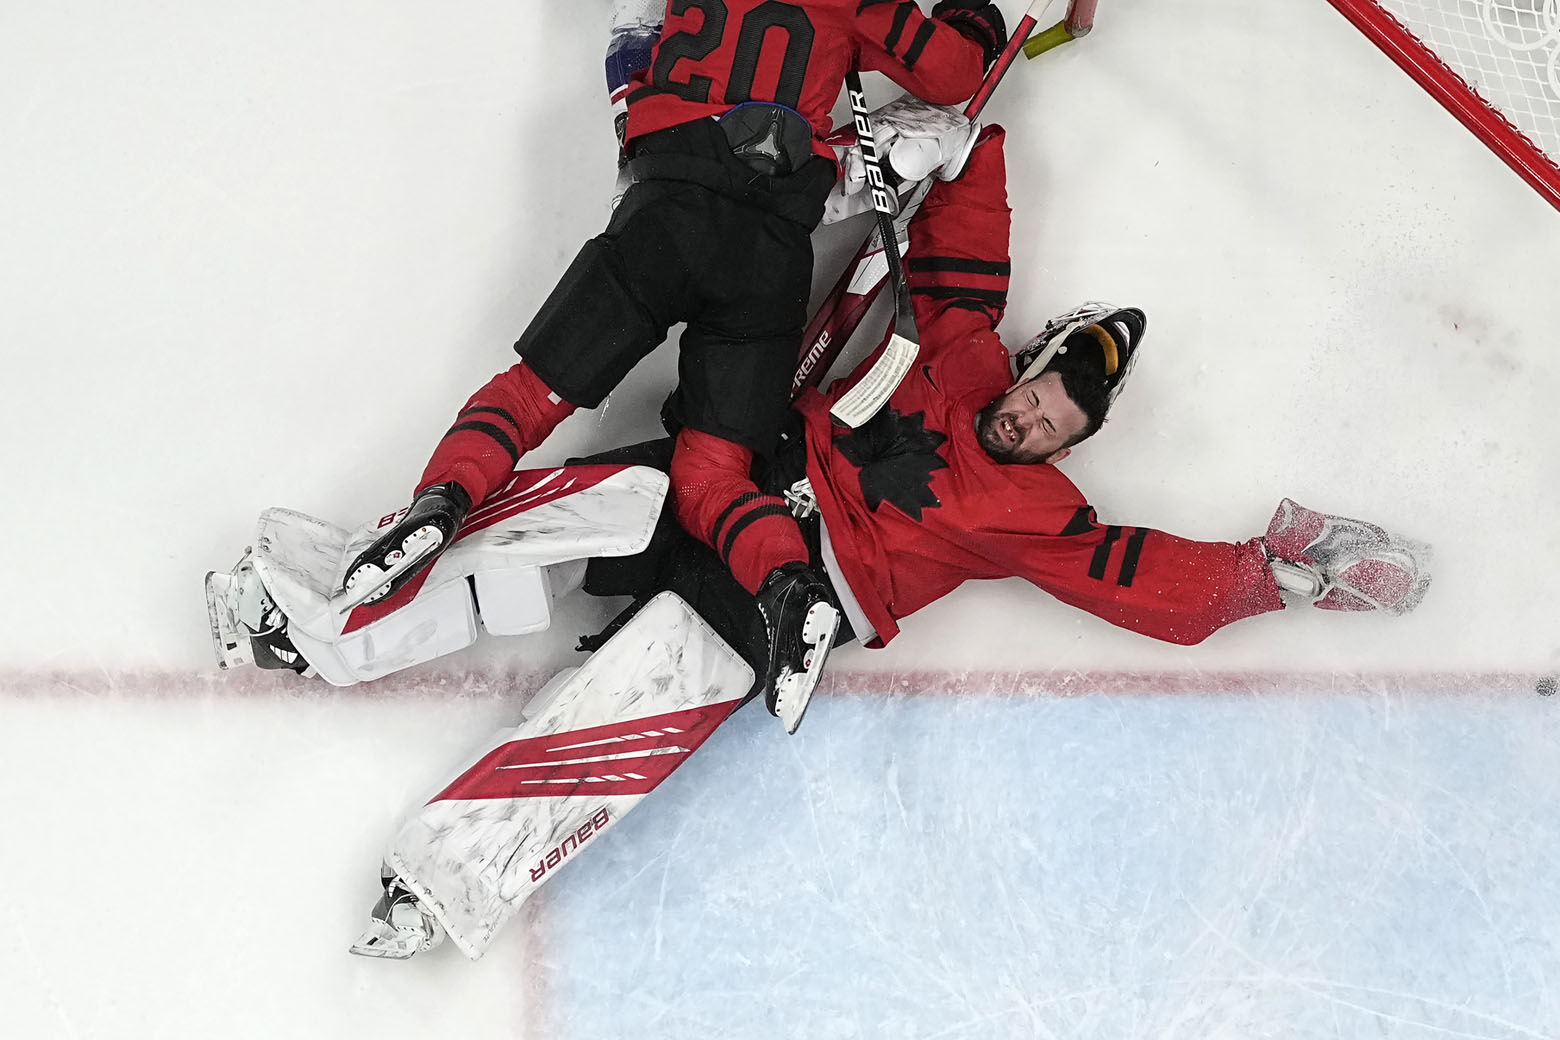 <p>Canada goalkeeper Eddie Pasquale is knocked down by teammate Alex Grant (20) during a preliminary round men&#8217;s hockey game against the United States at the 2022 Winter Olympics, Saturday, Feb. 12, 2022, in Beijing.</p>
